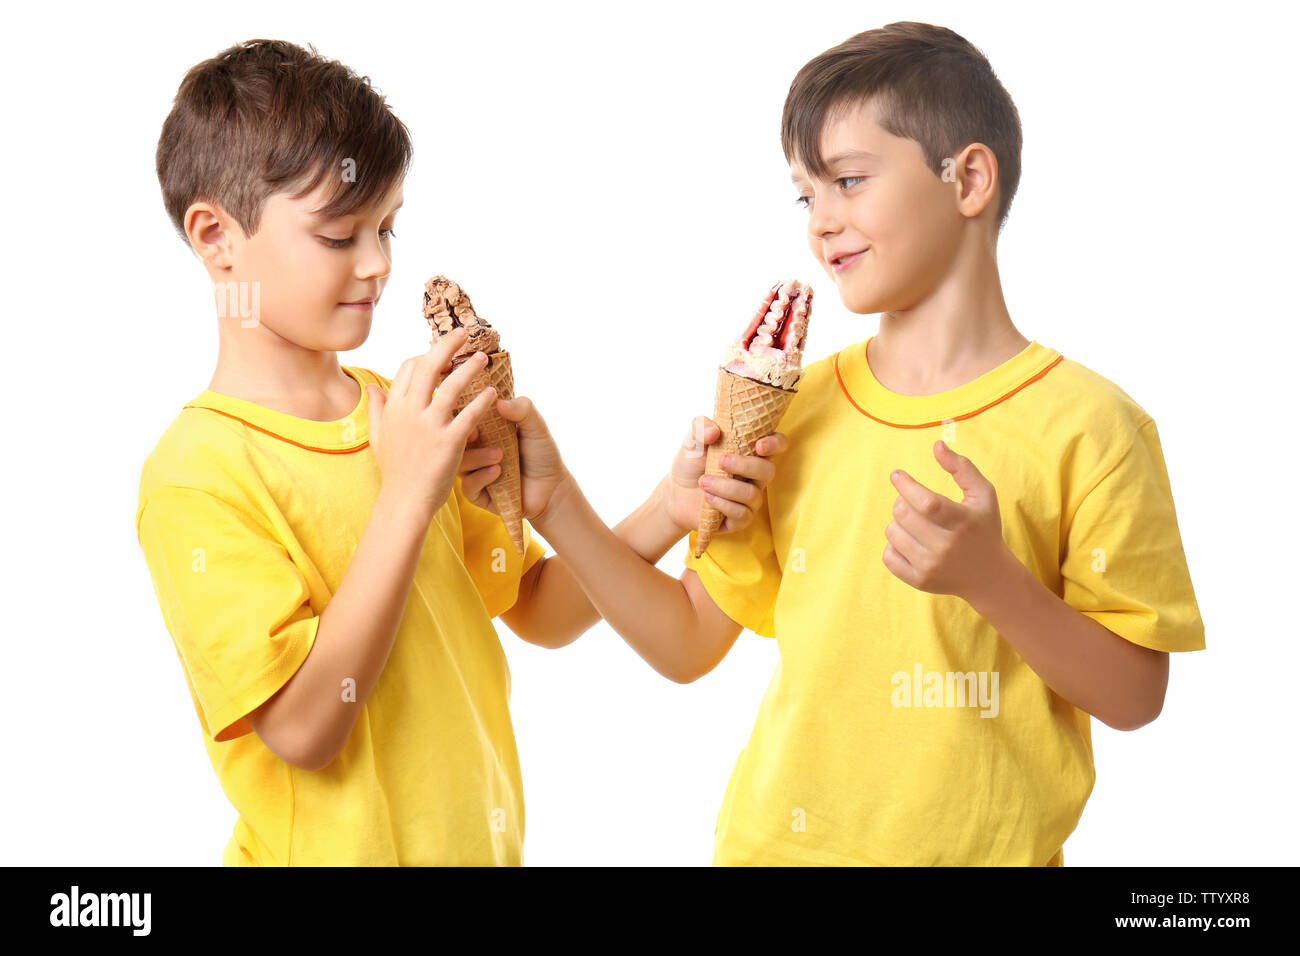 Cute boys with ice cream on white background Stock Photo